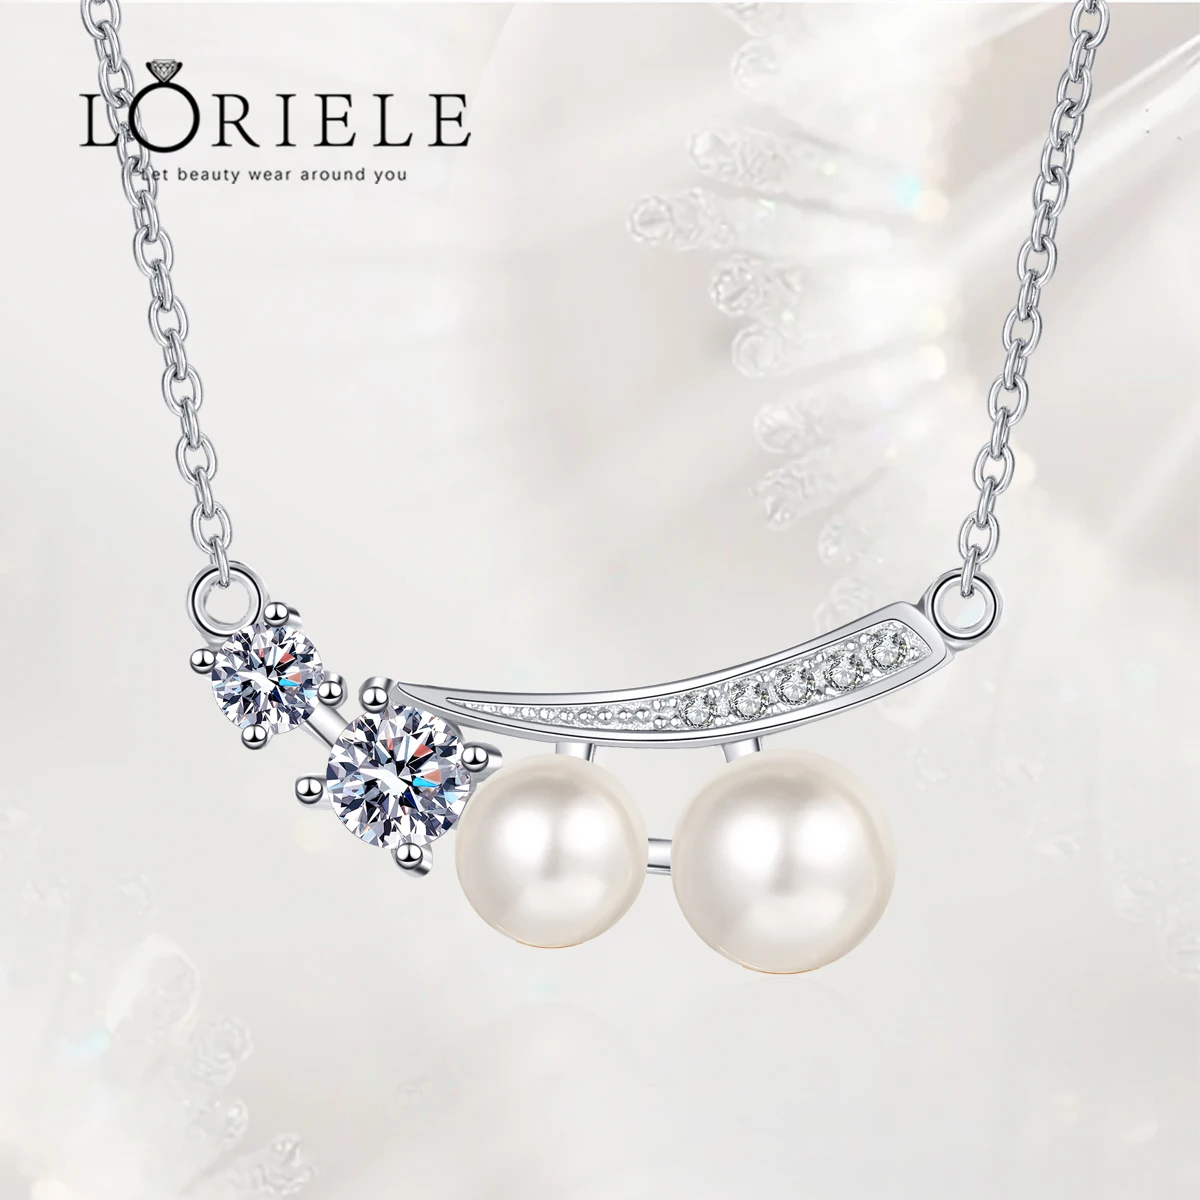 

LORIELE 925 Sterling Silver Nature Pearl Moissanite Pods Pendant Necklace Delicate Female Clavicle Chain Wedding Jewelry Gift